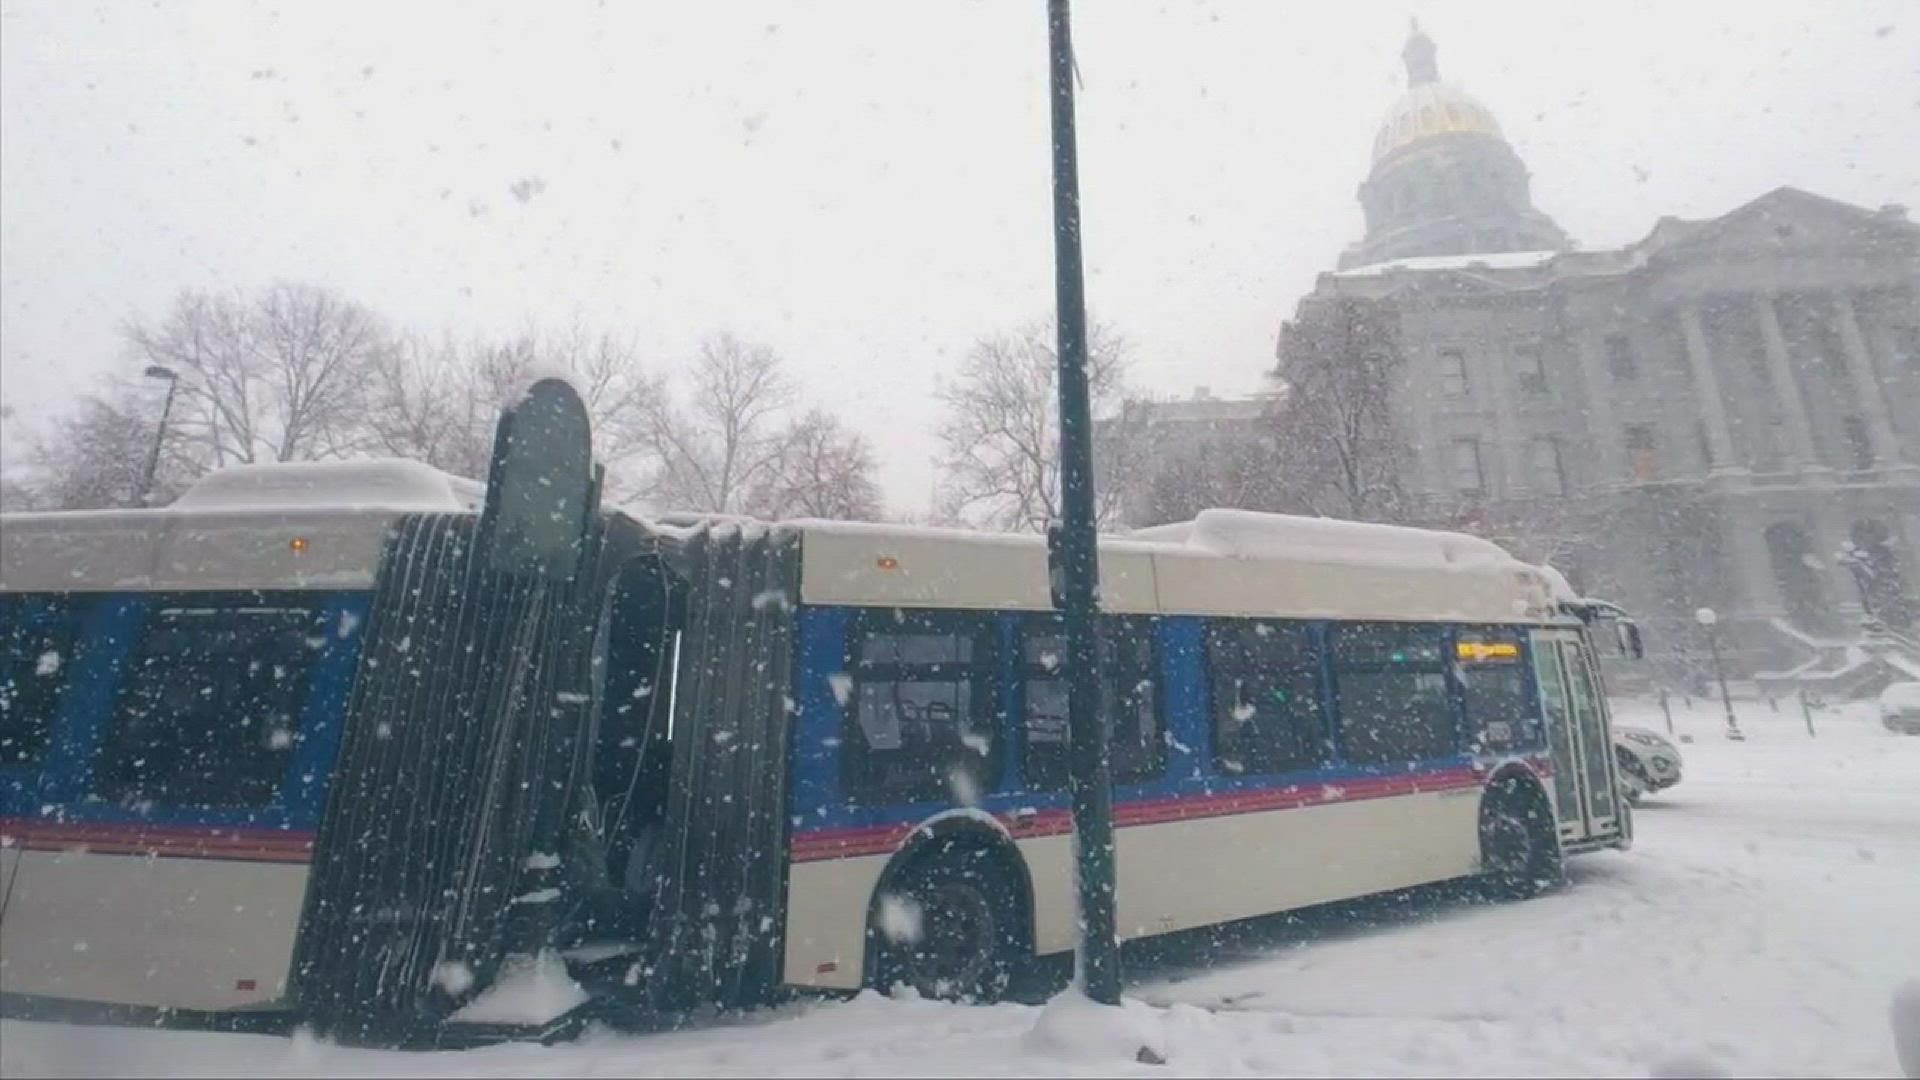 9NEWS received photos of a handful of buses that jackknifed or got stuck in the Capitol Hill area on Monday morning. One of the buses crashed on Broadway in front of the Capitol.